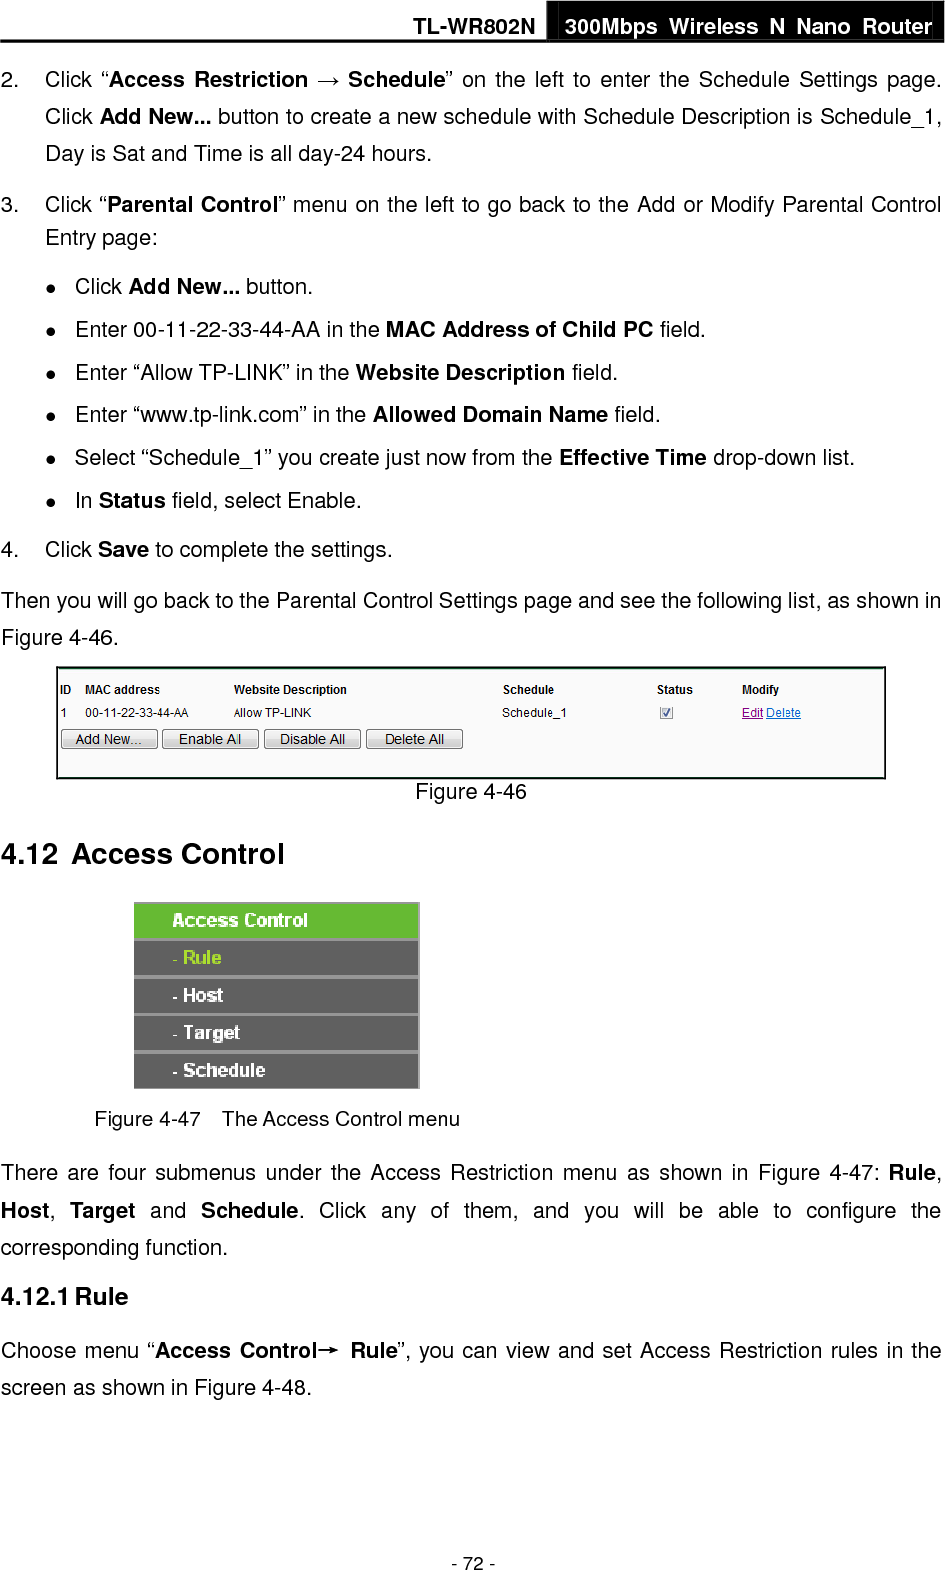 TL-WR802N 300Mbps  Wireless  N  Nano  Router  - 72 - 2.  Click “Access Restriction → Schedule” on the left to enter the Schedule Settings page. Click Add New... button to create a new schedule with Schedule Description is Schedule_1, Day is Sat and Time is all day-24 hours.   3.  Click “Parental Control” menu on the left to go back to the Add or Modify Parental Control Entry page:    Click Add New... button.    Enter 00-11-22-33-44-AA in the MAC Address of Child PC field.    Enter “Allow TP-LINK” in the Website Description field.    Enter “www.tp-link.com” in the Allowed Domain Name field.    Select “Schedule_1” you create just now from the Effective Time drop-down list.    In Status field, select Enable.   4.  Click Save to complete the settings. Then you will go back to the Parental Control Settings page and see the following list, as shown in Figure 4-46.  Figure 4-46 4.12  Access Control  Figure 4-47    The Access Control menu There are four submenus under the Access Restriction menu as shown in Figure 4-47: Rule, Host,  Target  and  Schedule.  Click  any  of  them,  and  you  will  be  able  to  configure  the corresponding function. 4.12.1 Rule Choose menu “Access Control→  Rule”, you can view and set Access Restriction rules in the screen as shown in Figure 4-48.   